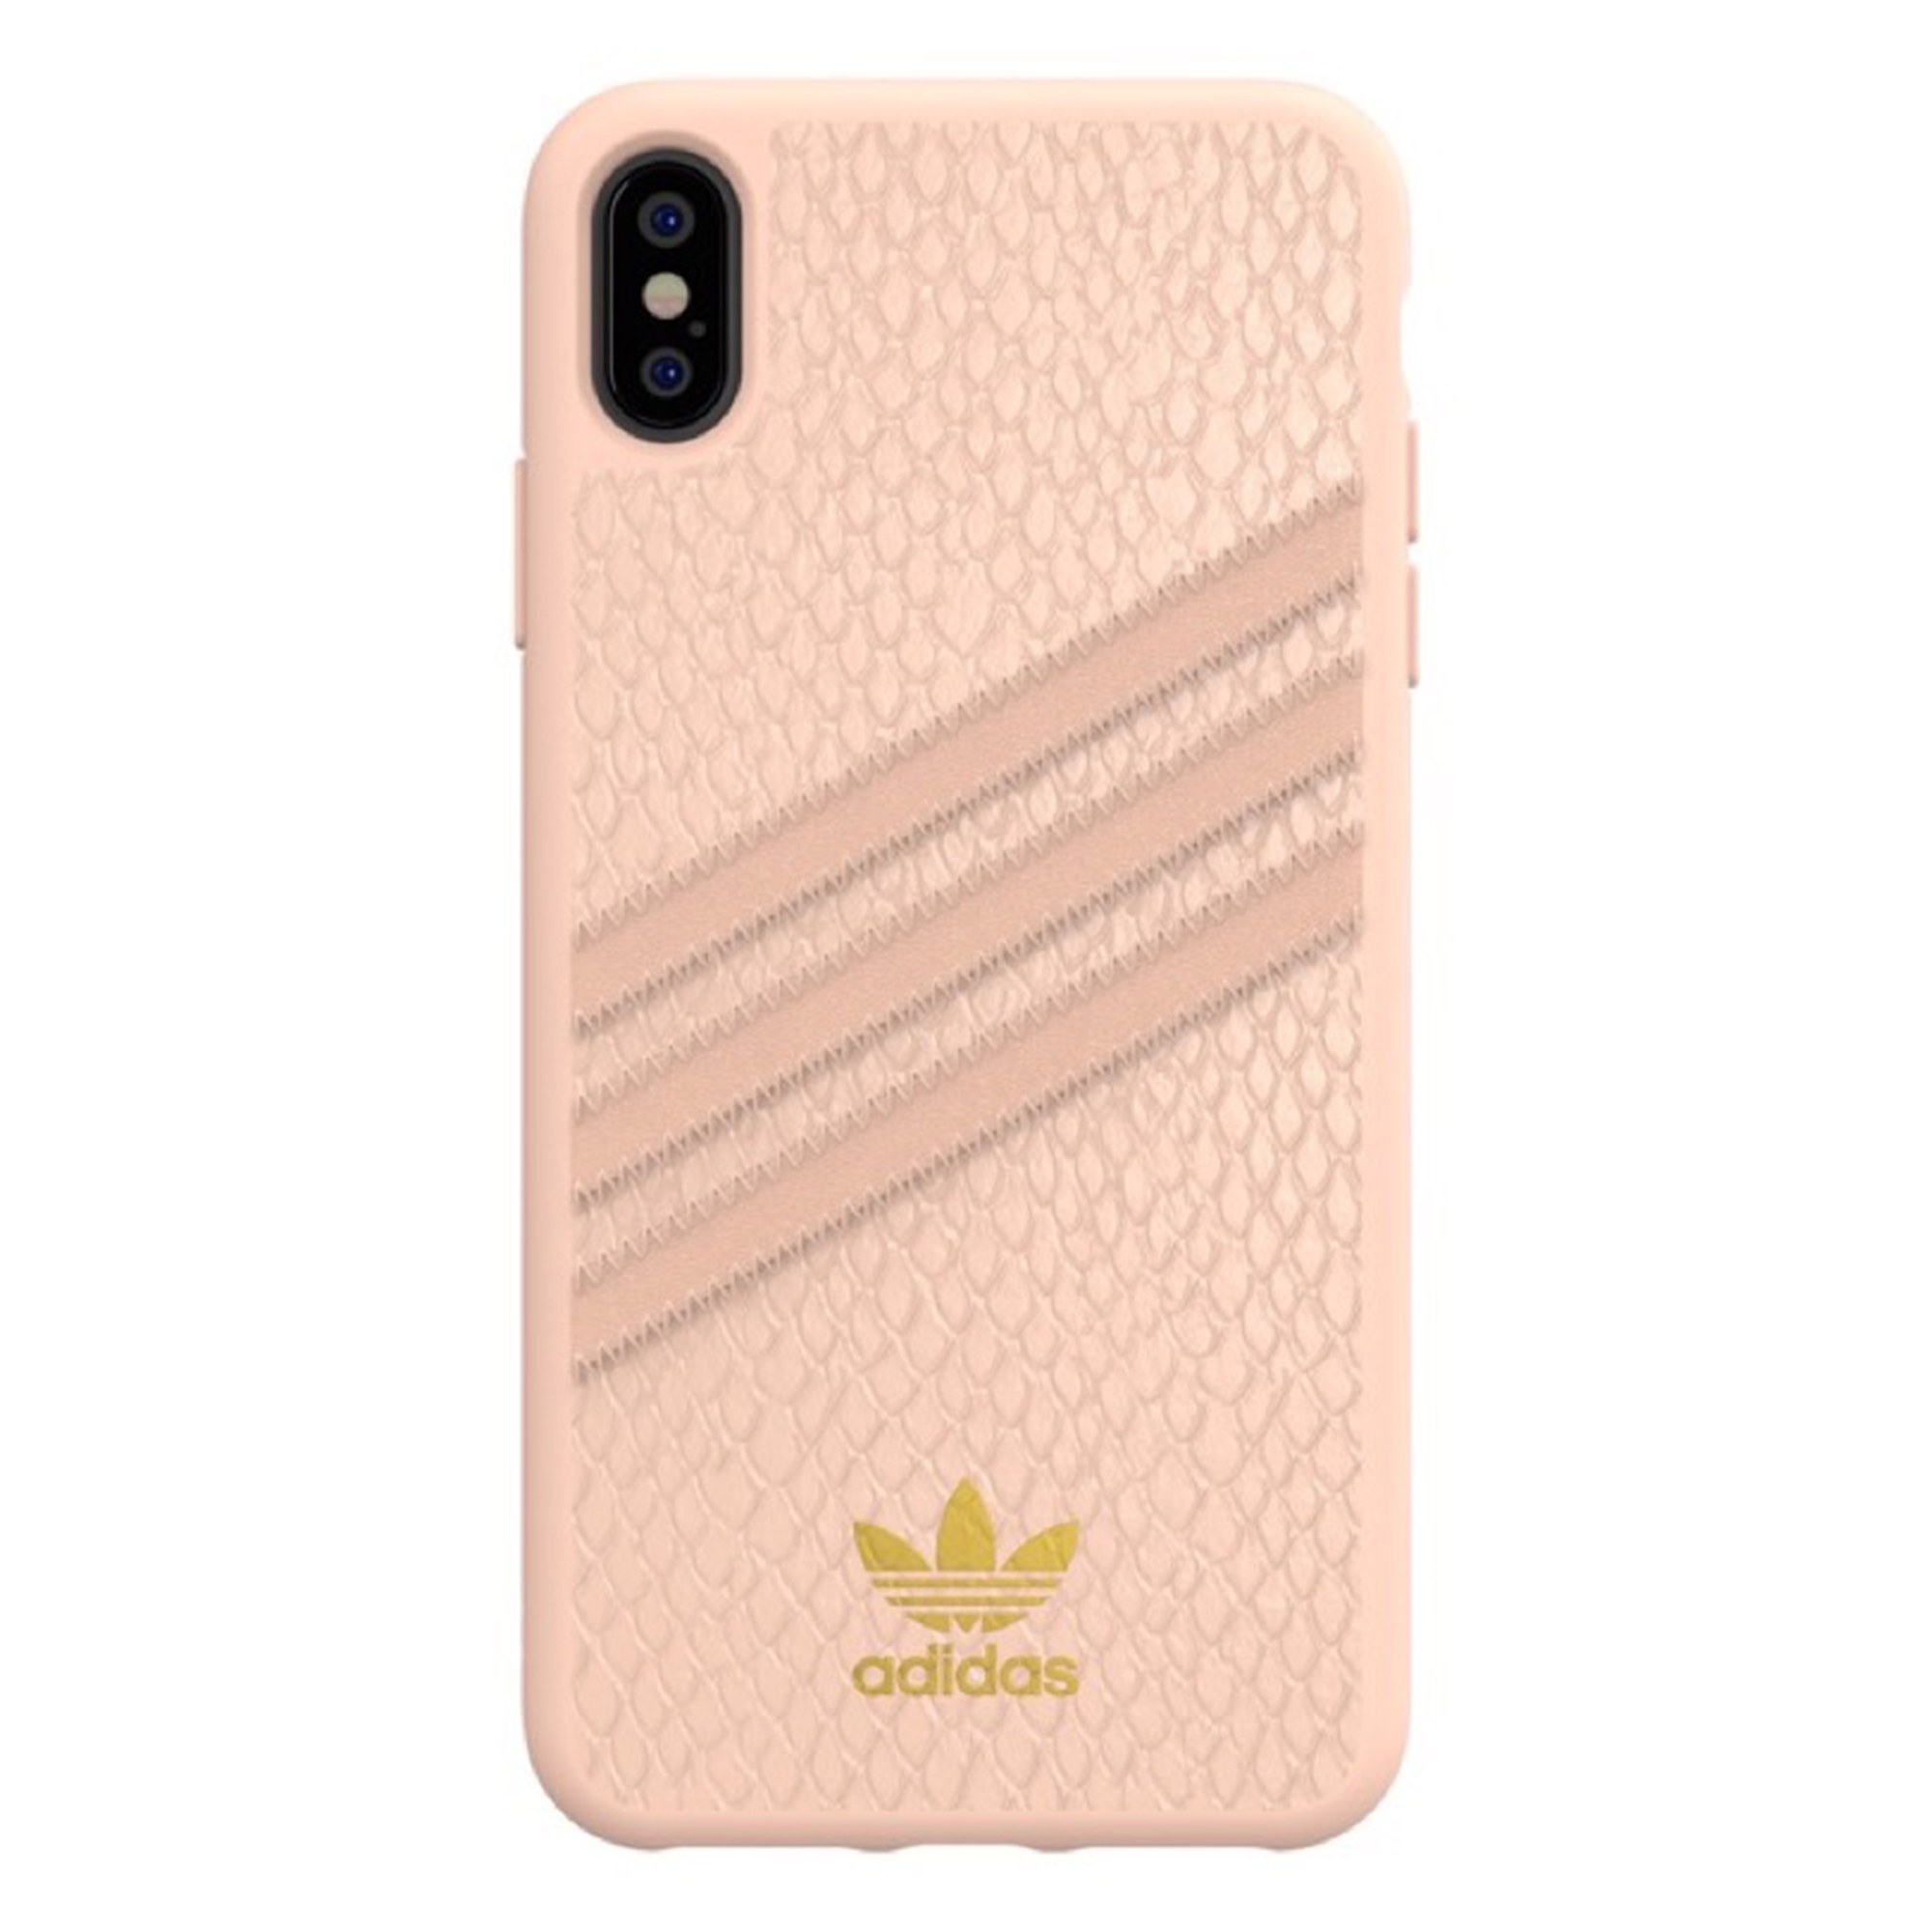 Adidas Originals Moulded Case PU SNAKE for iPhone XS Max - SmarTone Online  Store